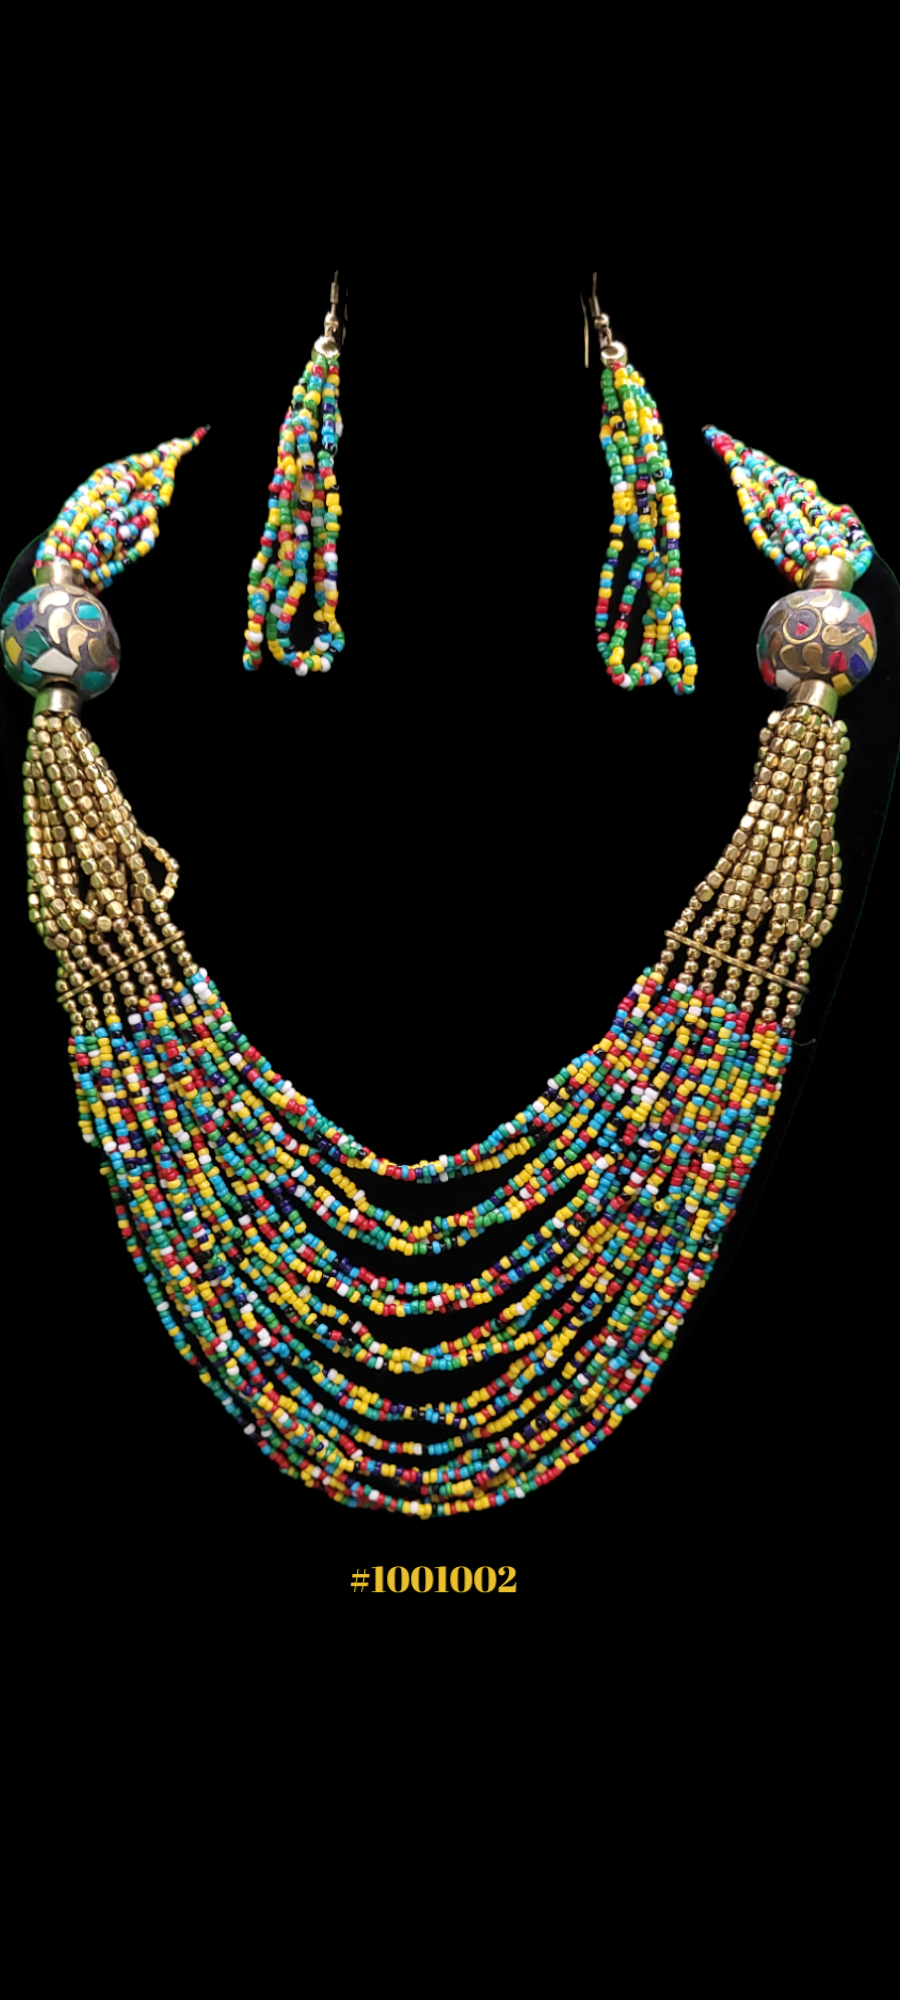 COLORFUL BEADED NECKLACE WITH EARRINGS